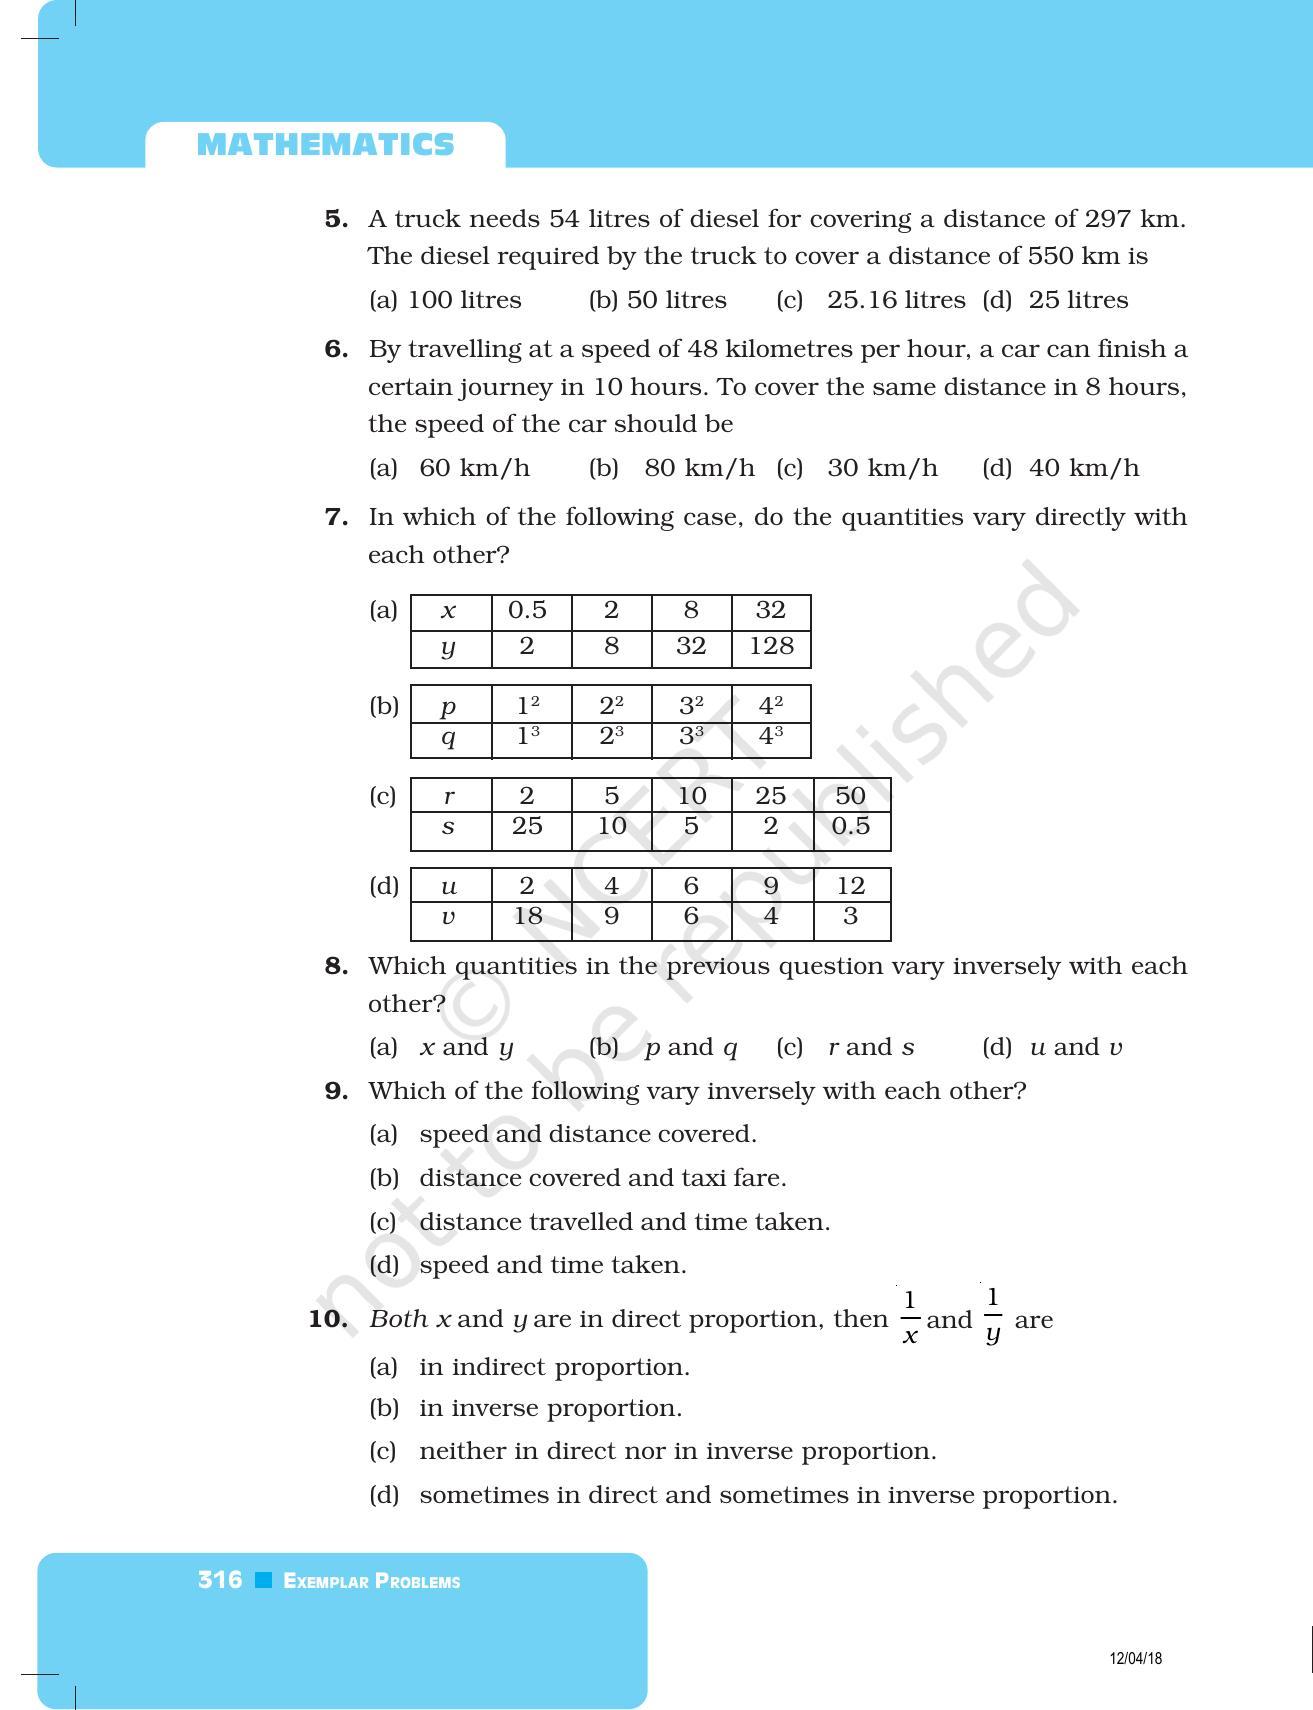 NCERT Exemplar Book for Class 8 Maths: Chapter 10- Direct and Inverse Proportions - Page 8